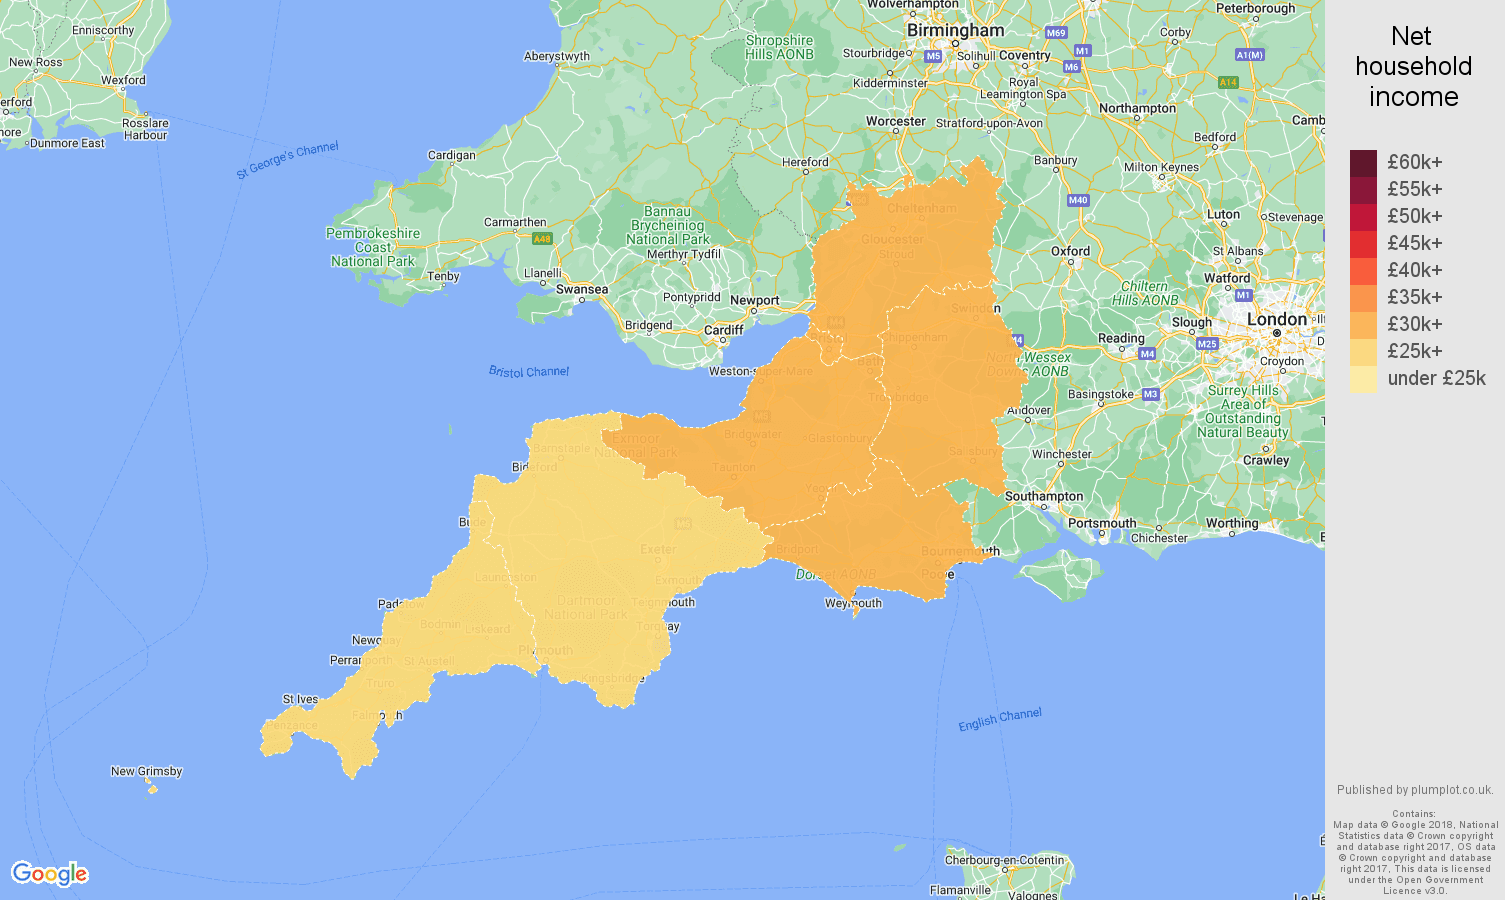 South West net household income map